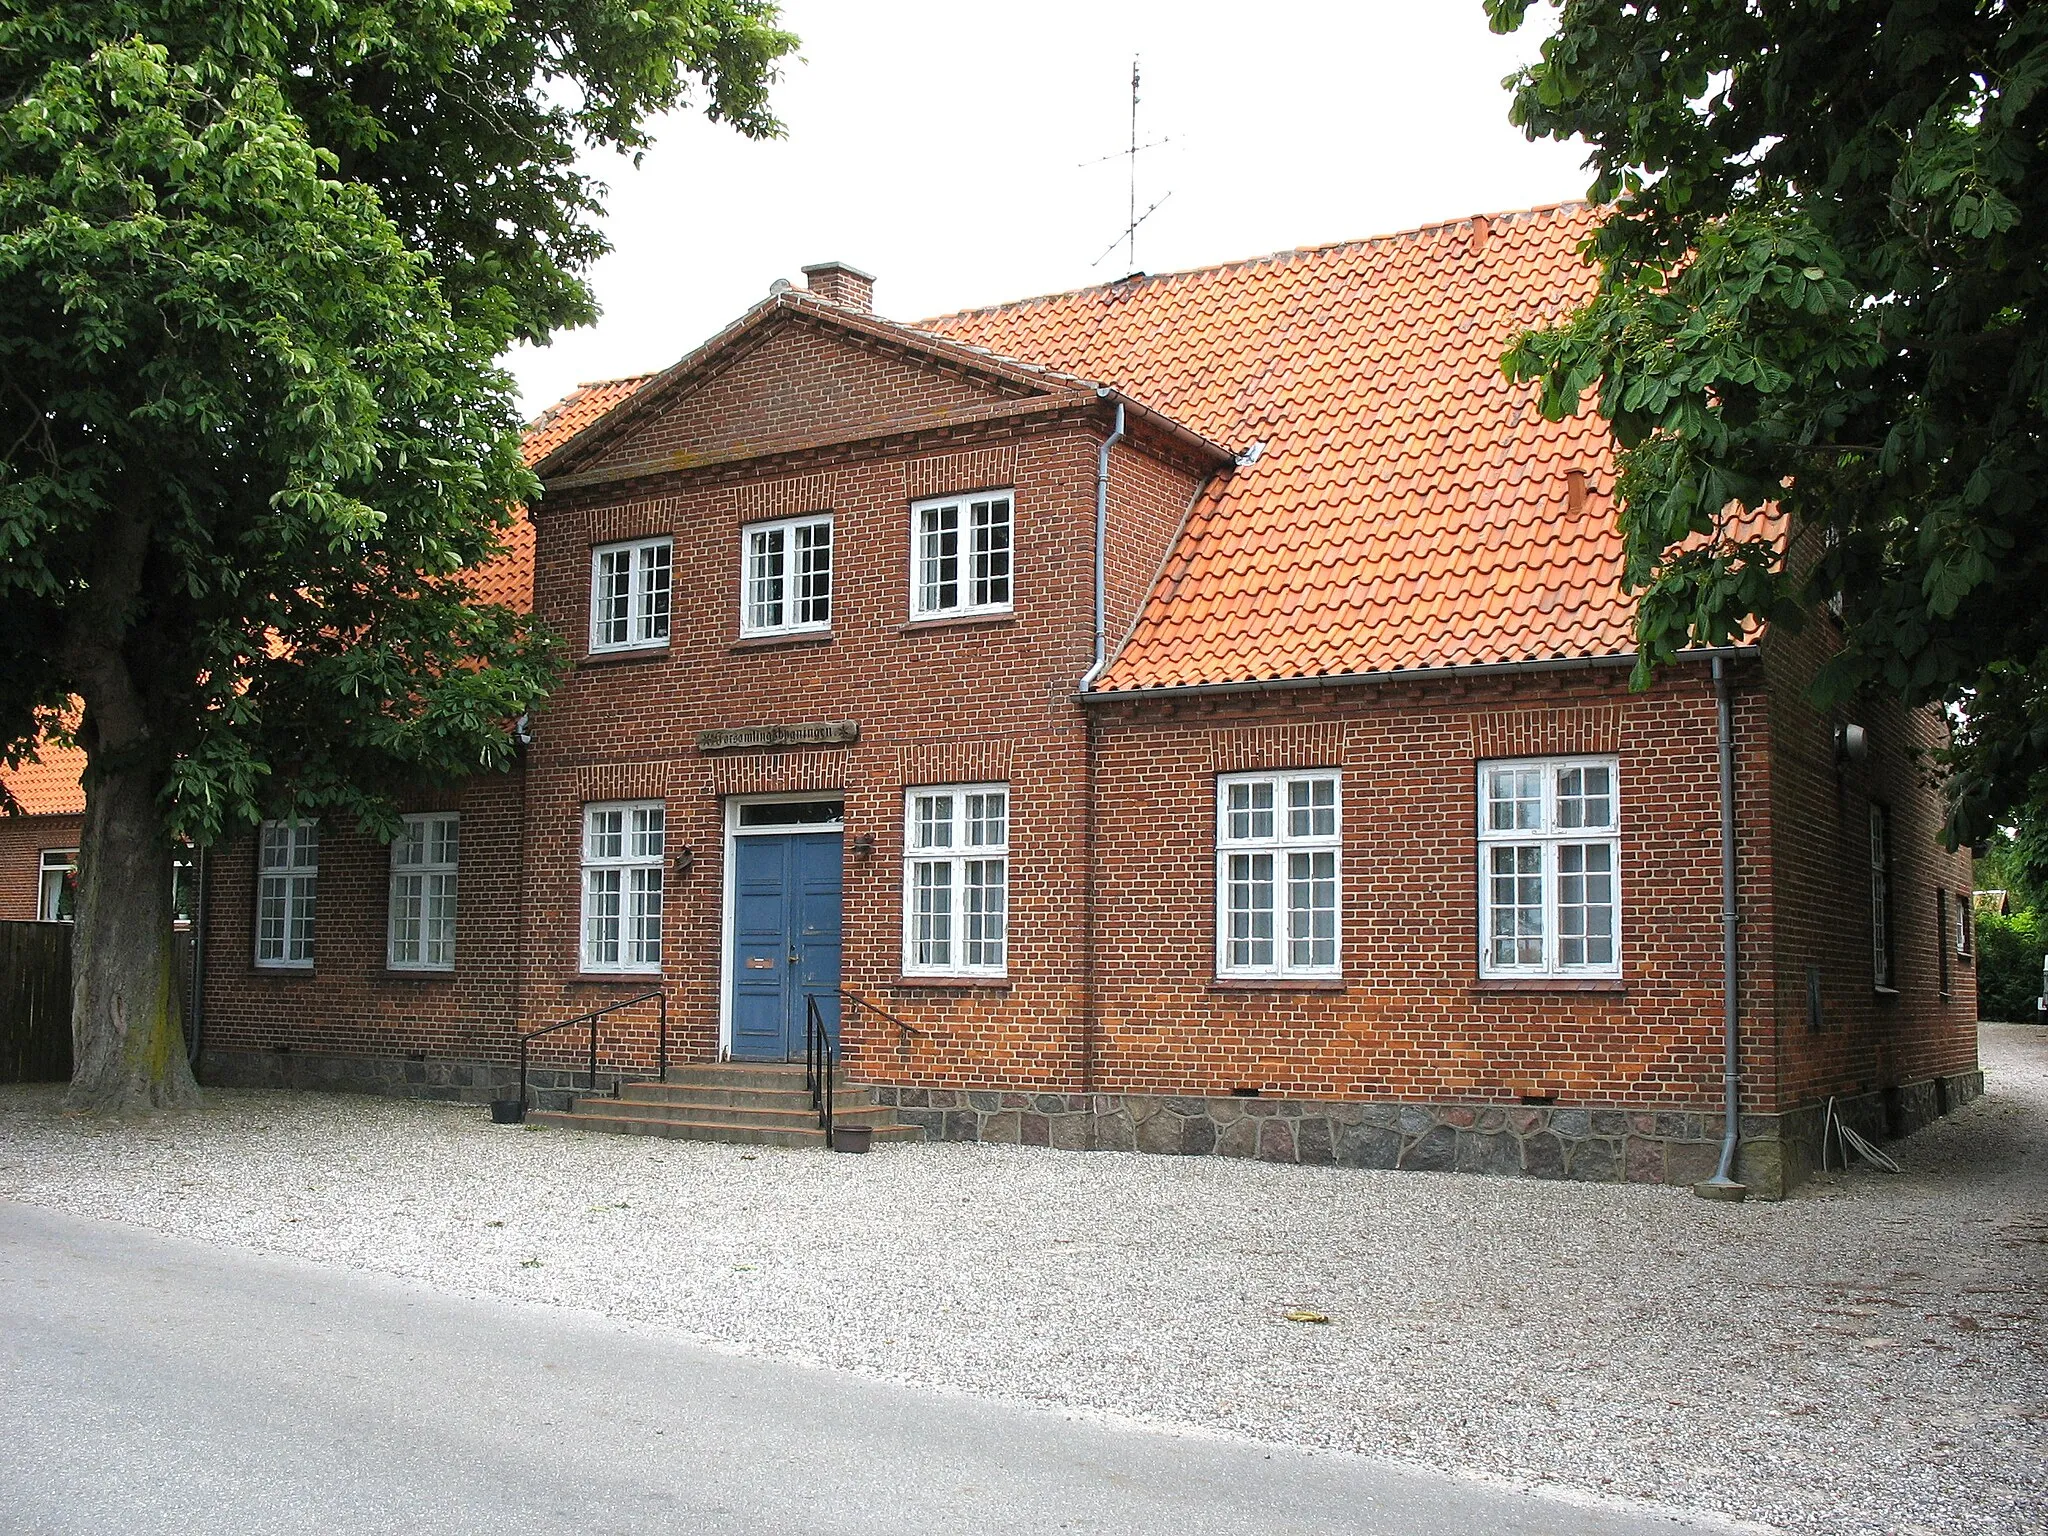 Photo showing: Village hall in the small town "Væggerløse" located on the island Falster in east Denmark.